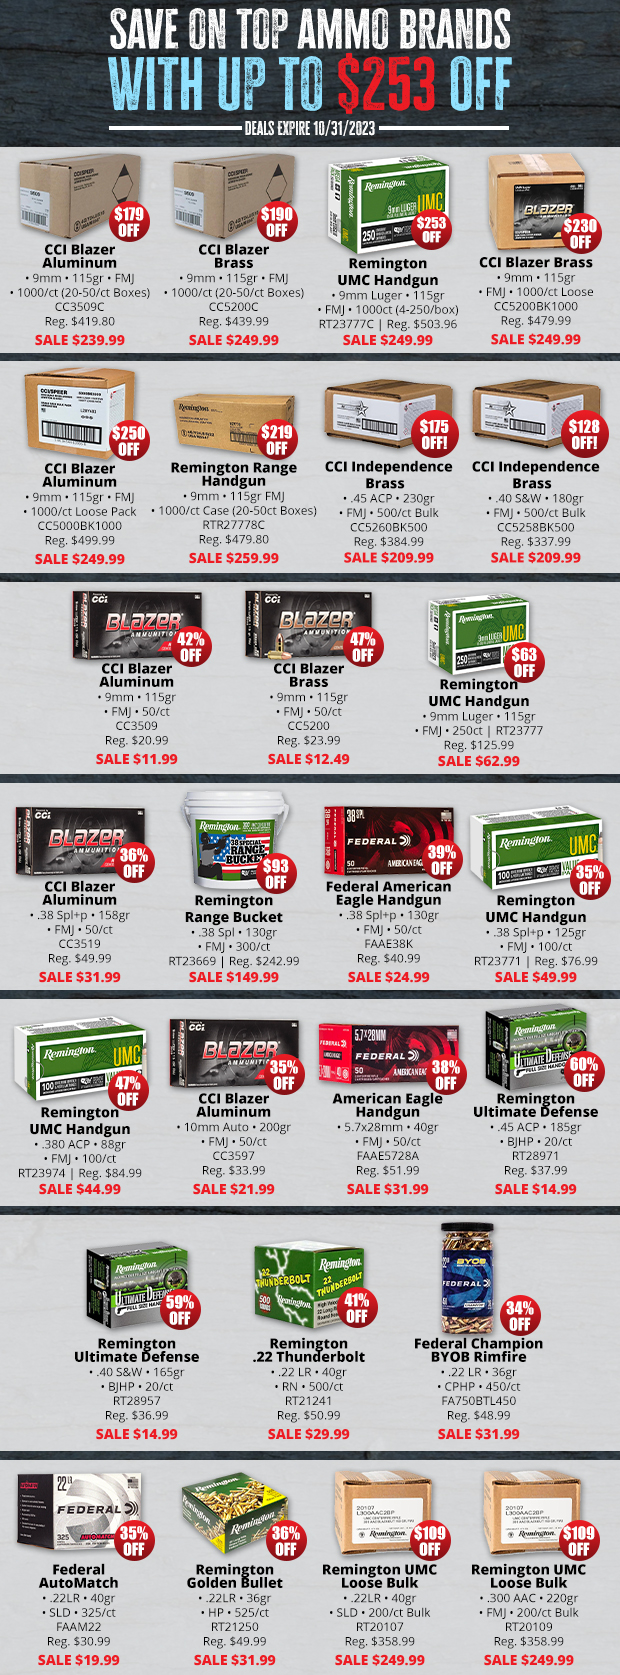 Up to $253 Off Ammo!